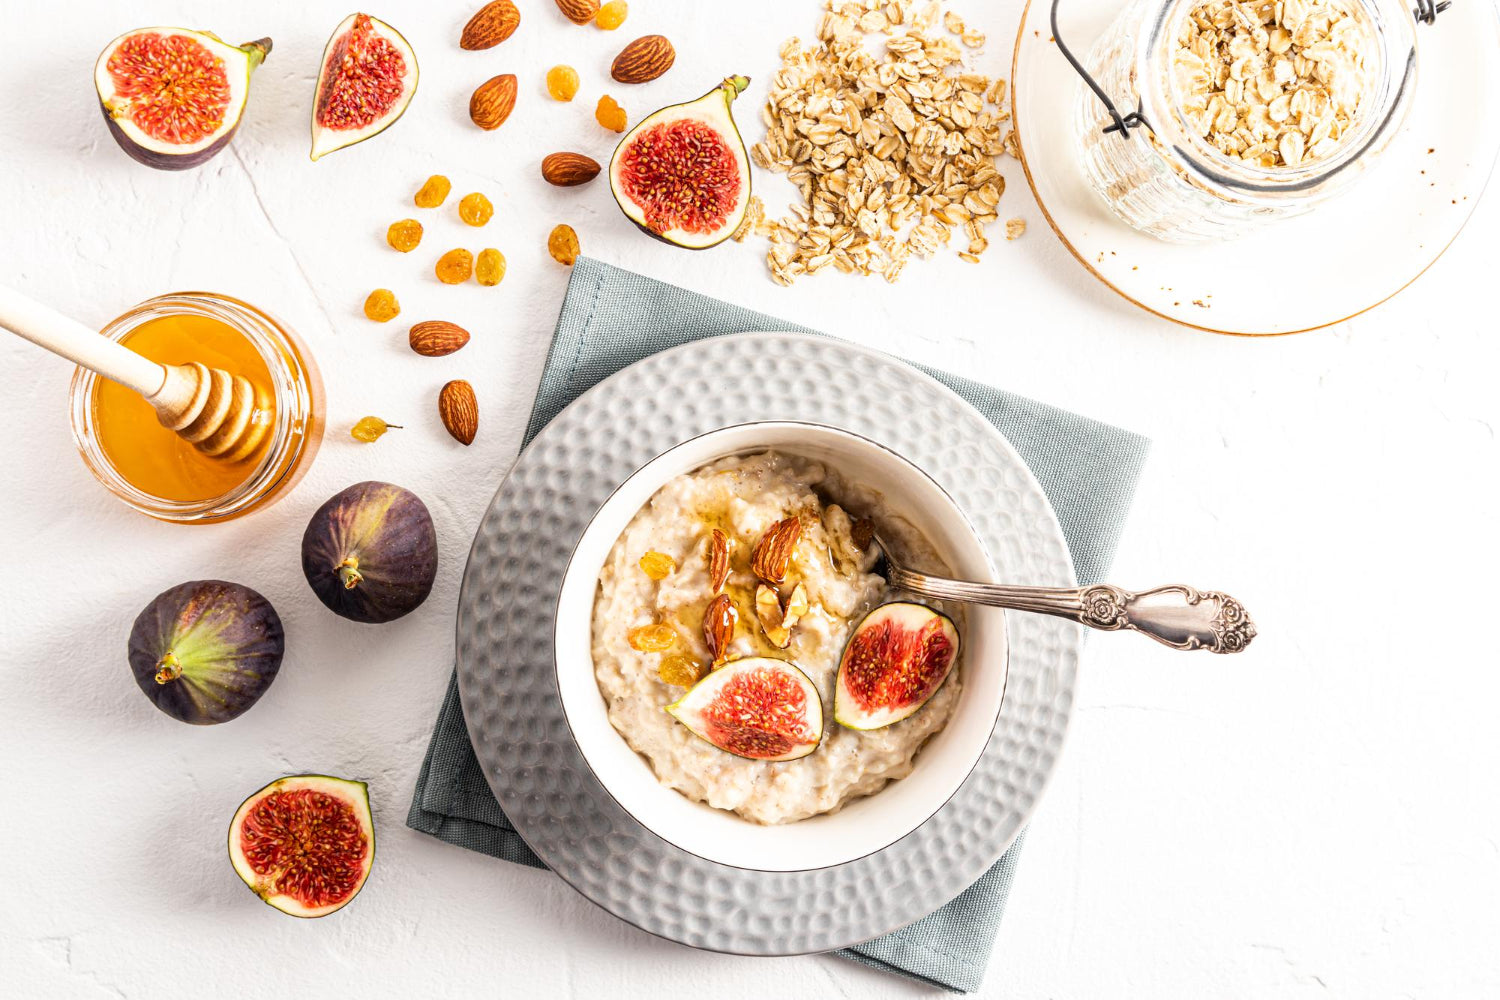 Discovering the Top 5 Nutrition Facts of Rolled Oats: A Healthy Guide